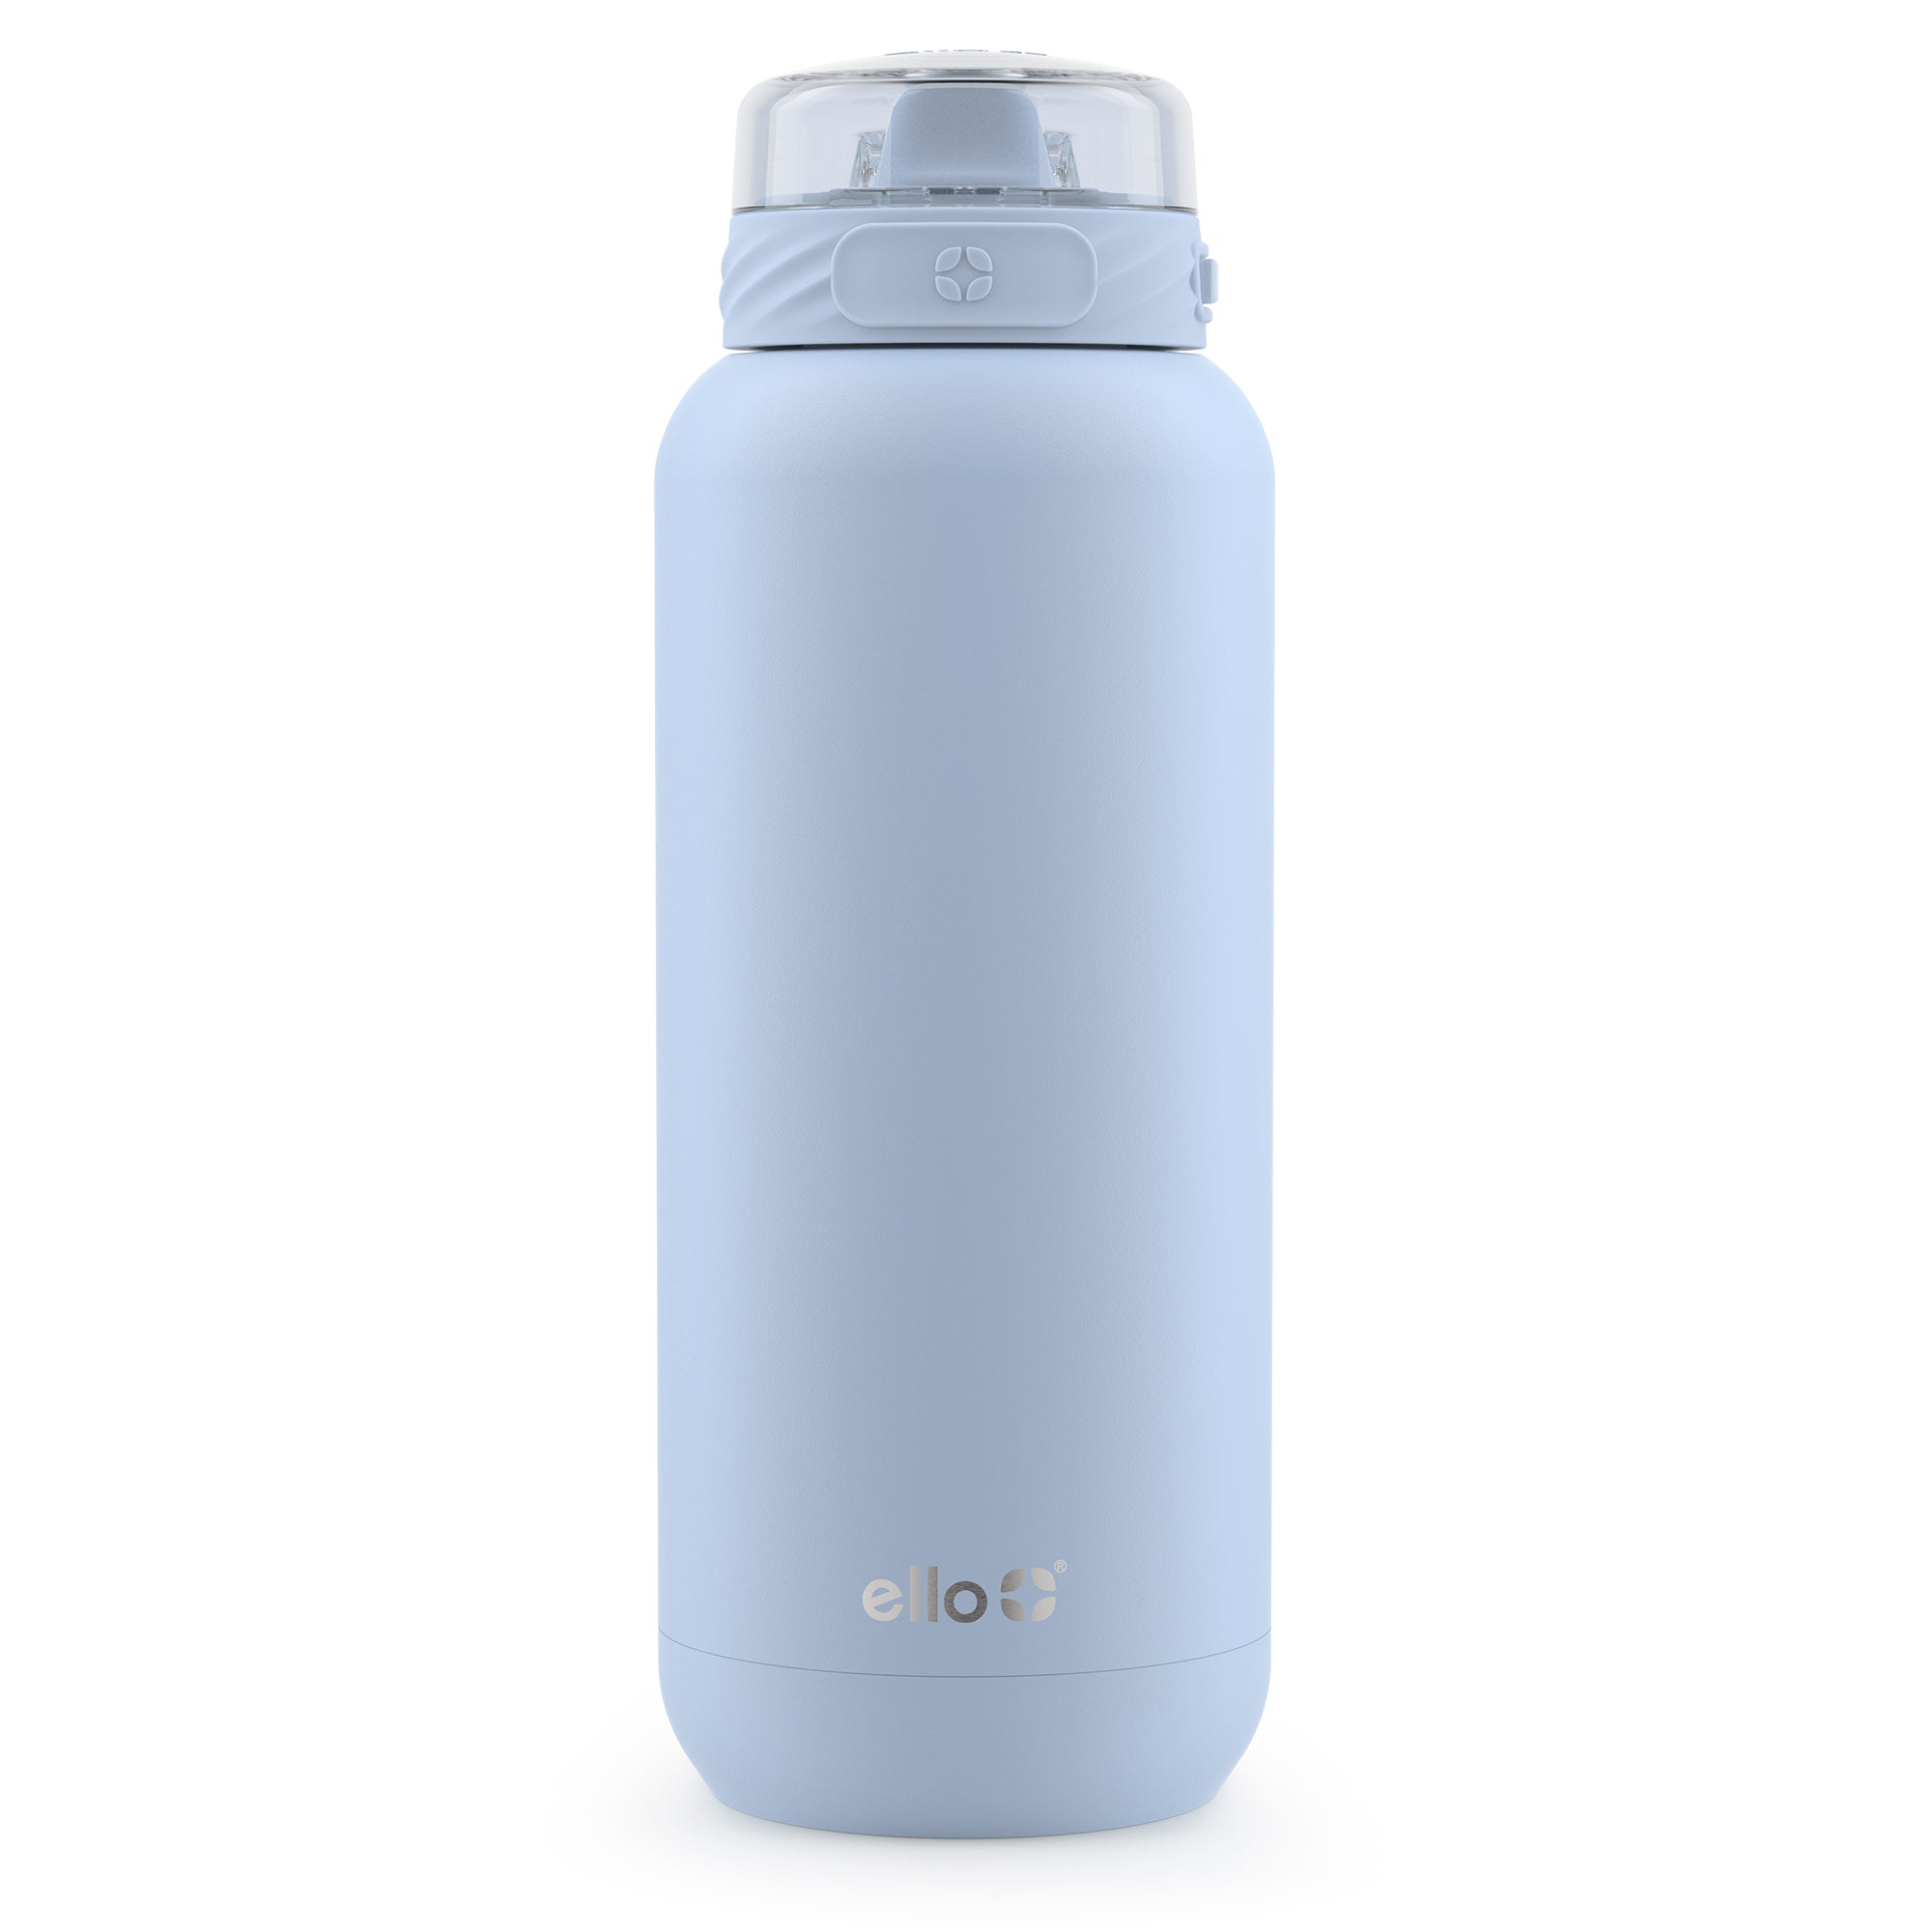 Ello Cooper XL Stainless Steel Water Bottle - Yucca - 32-Ounce - Each